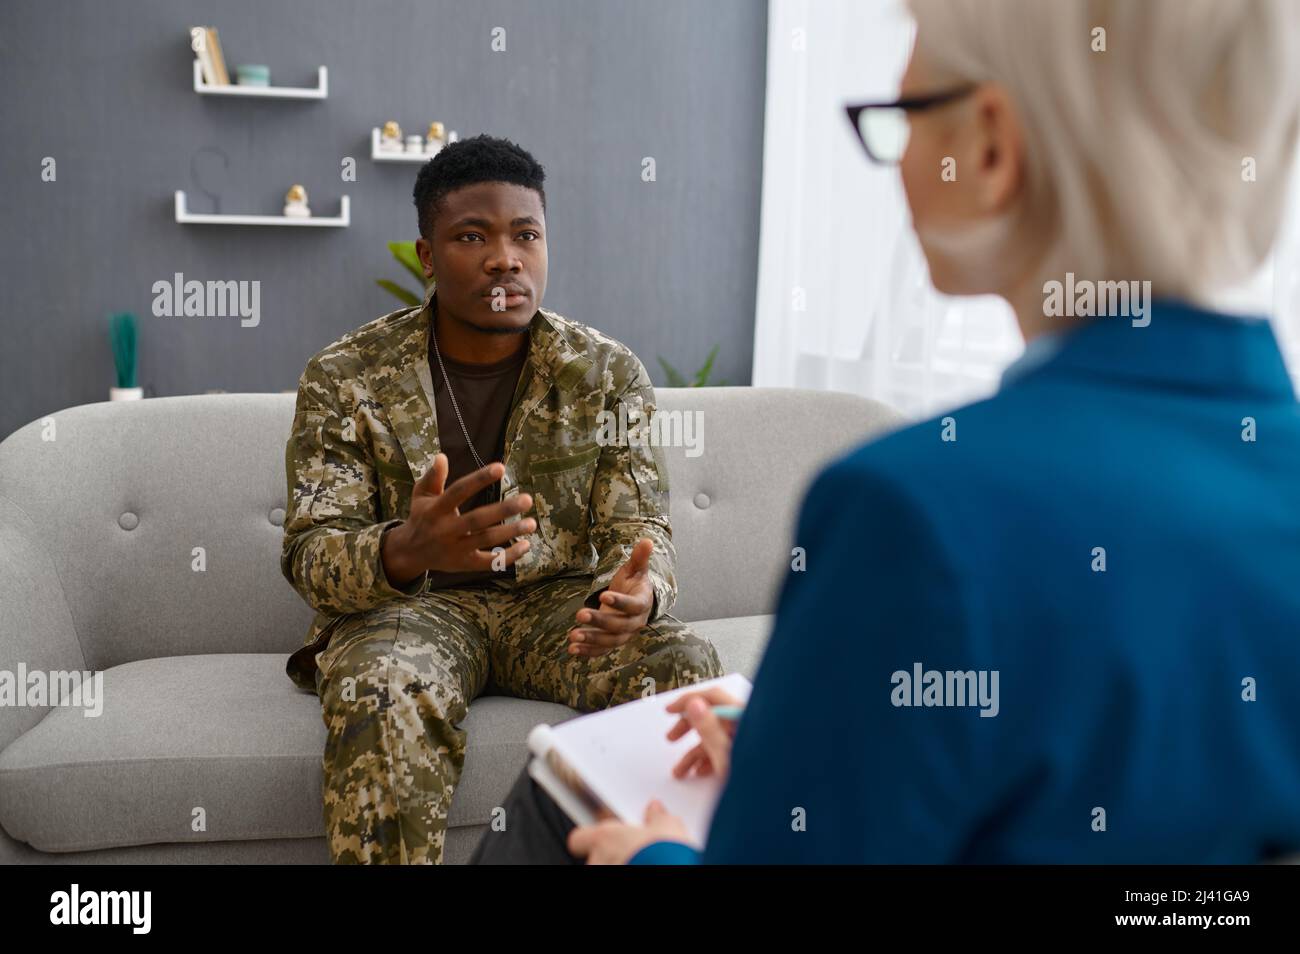 Professional psychologist giving advice to military patient Stock Photo